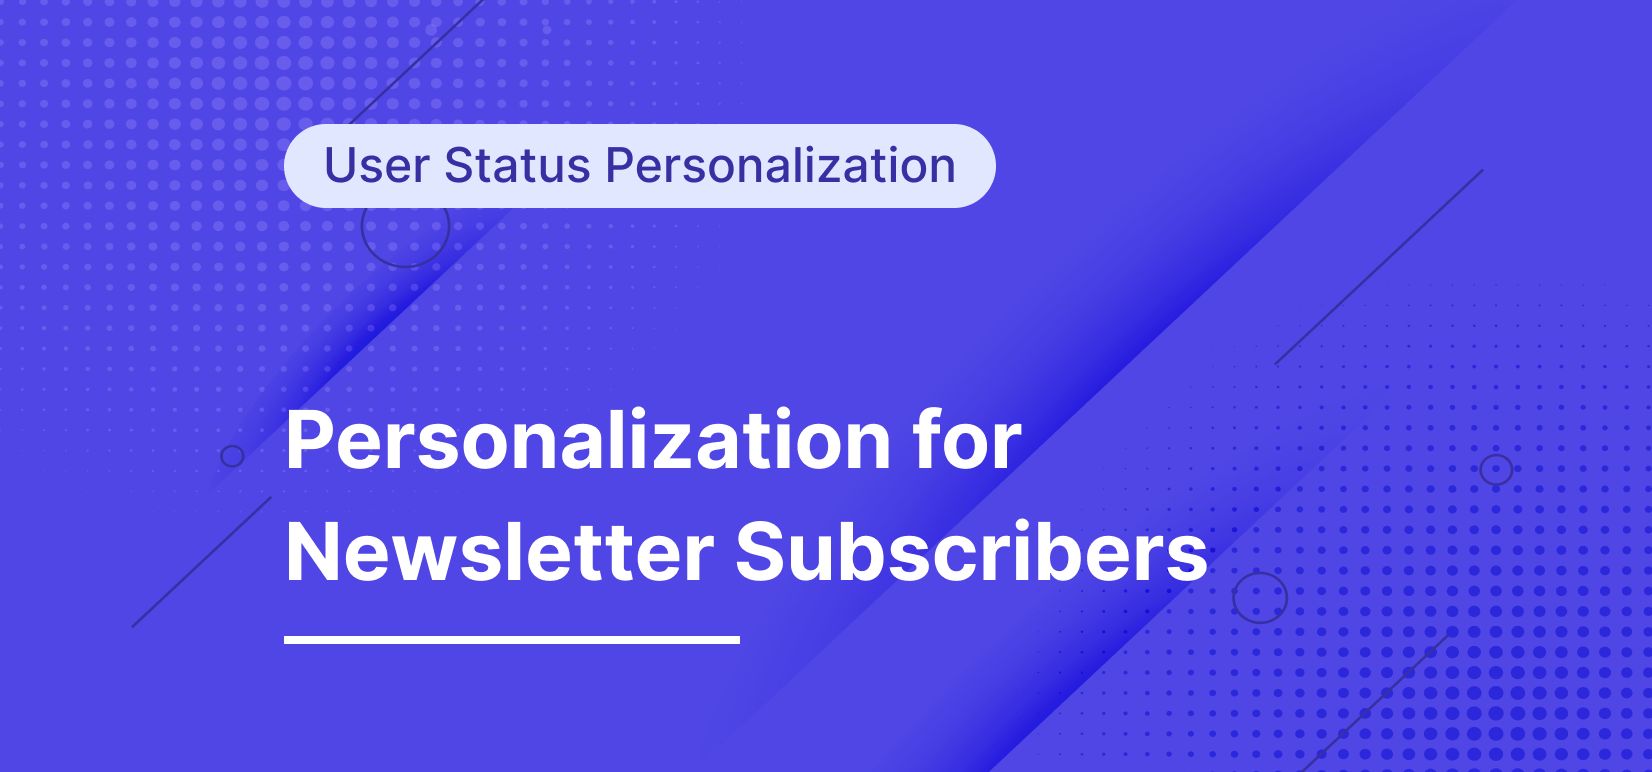 How to Personalize Your Website for Newsletter Subscribers